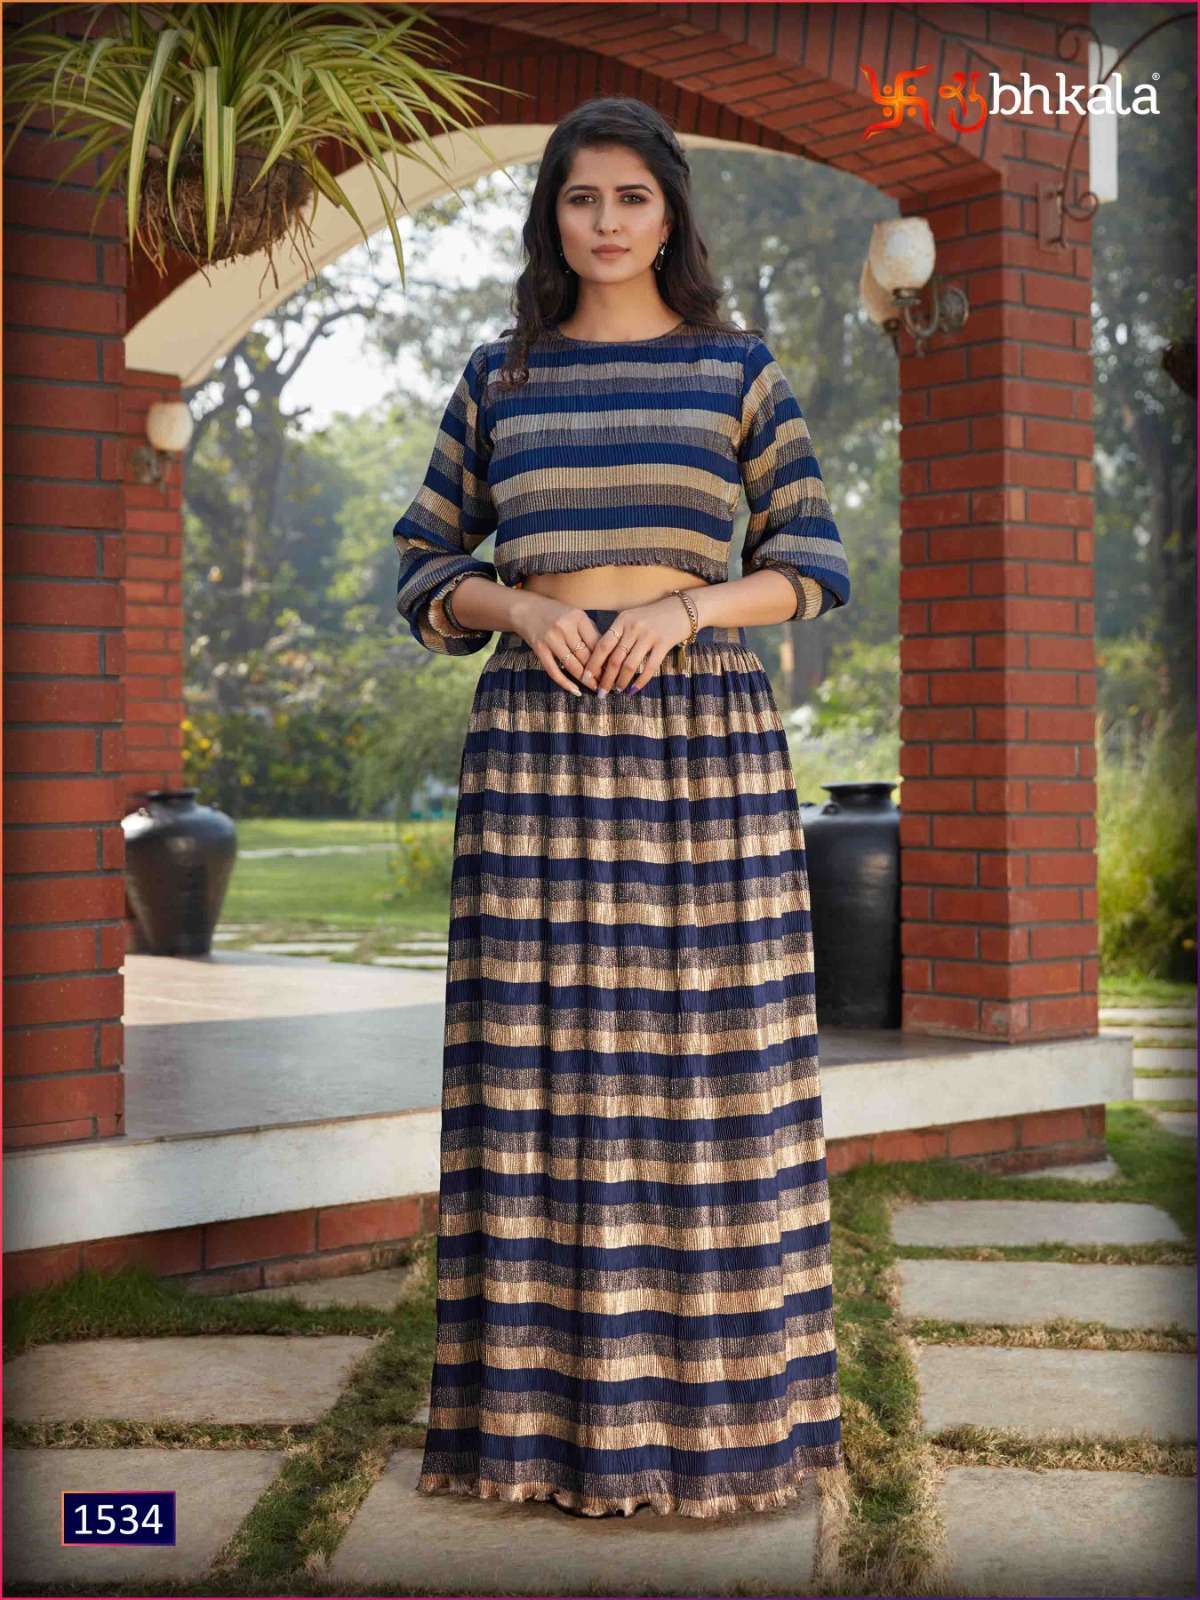 Present A multicolor long-tired Dress Kurtis with an embroidered yoke  Dresses and tassels sounds like a beautiful and vibrant garment This style  of kurti combines various colors and textures to create a